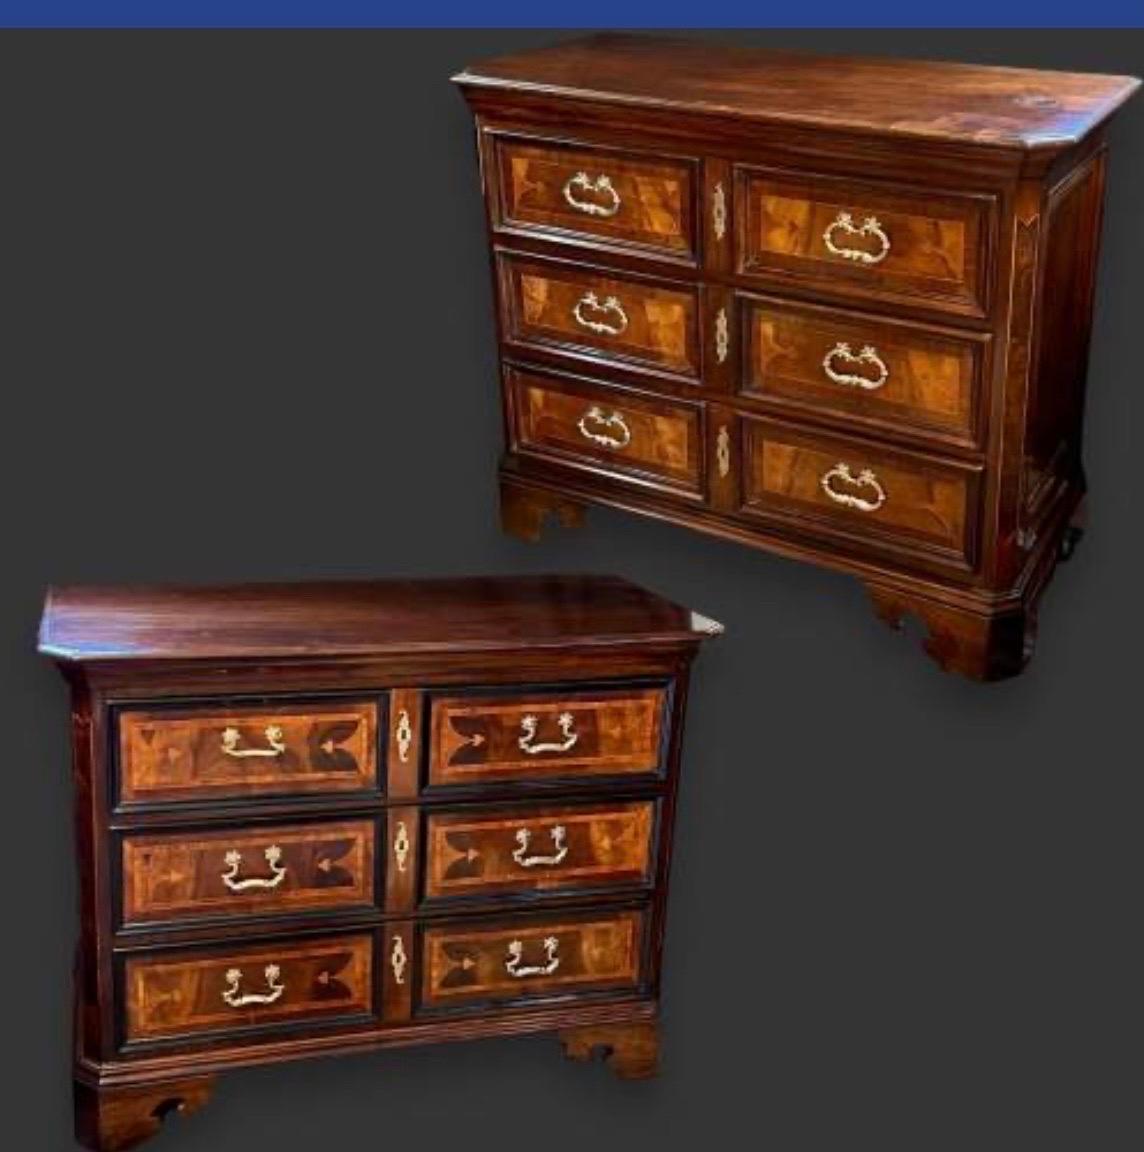  A Large 18th Century Northern Italian Chest of Drawers  For Sale 7